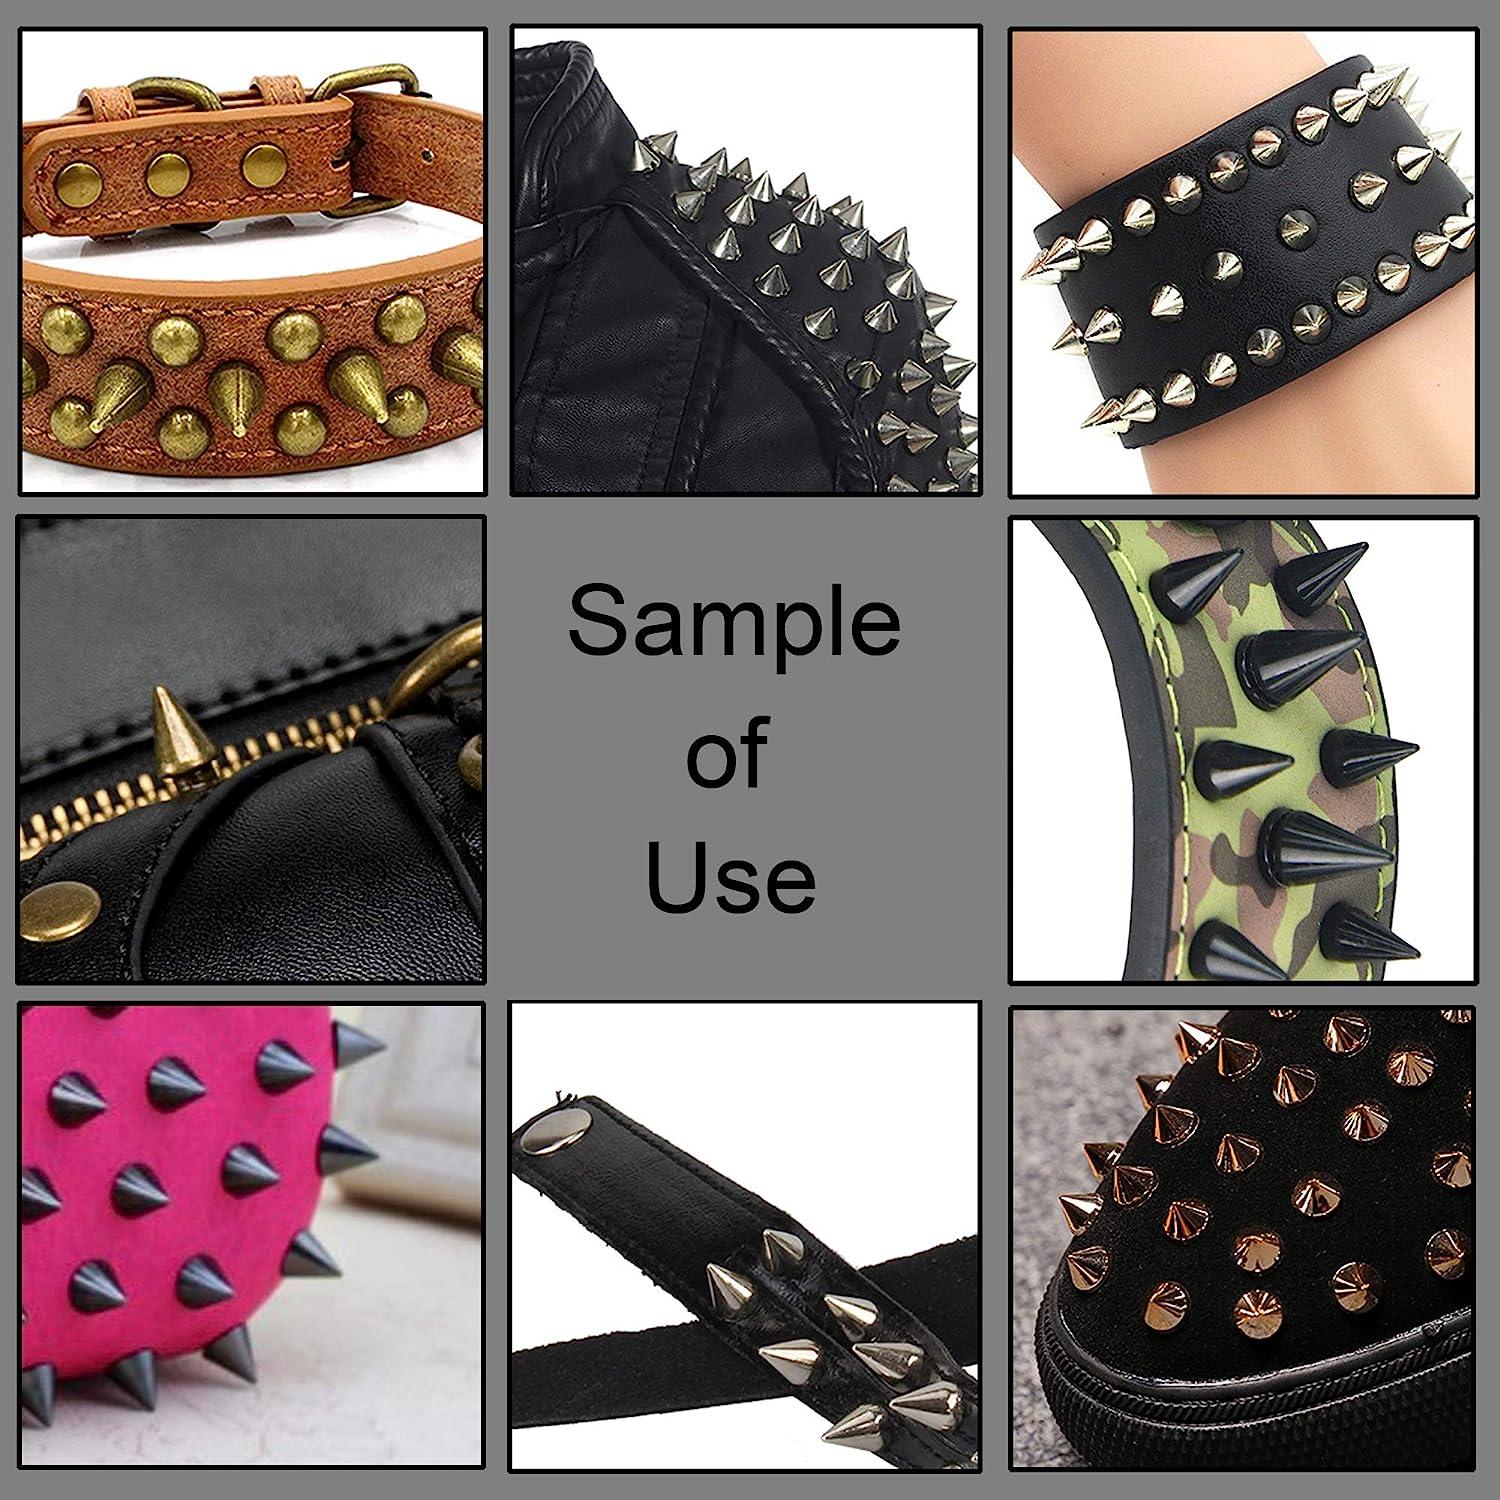 270 Sets Punk Spikes, CAMXTOOL Spikes for Clothing, 12 Sizes Studs and Spikes Kit Cone Spikes Leather Rivets Gothic Screw Back Studs, DIY Necklace